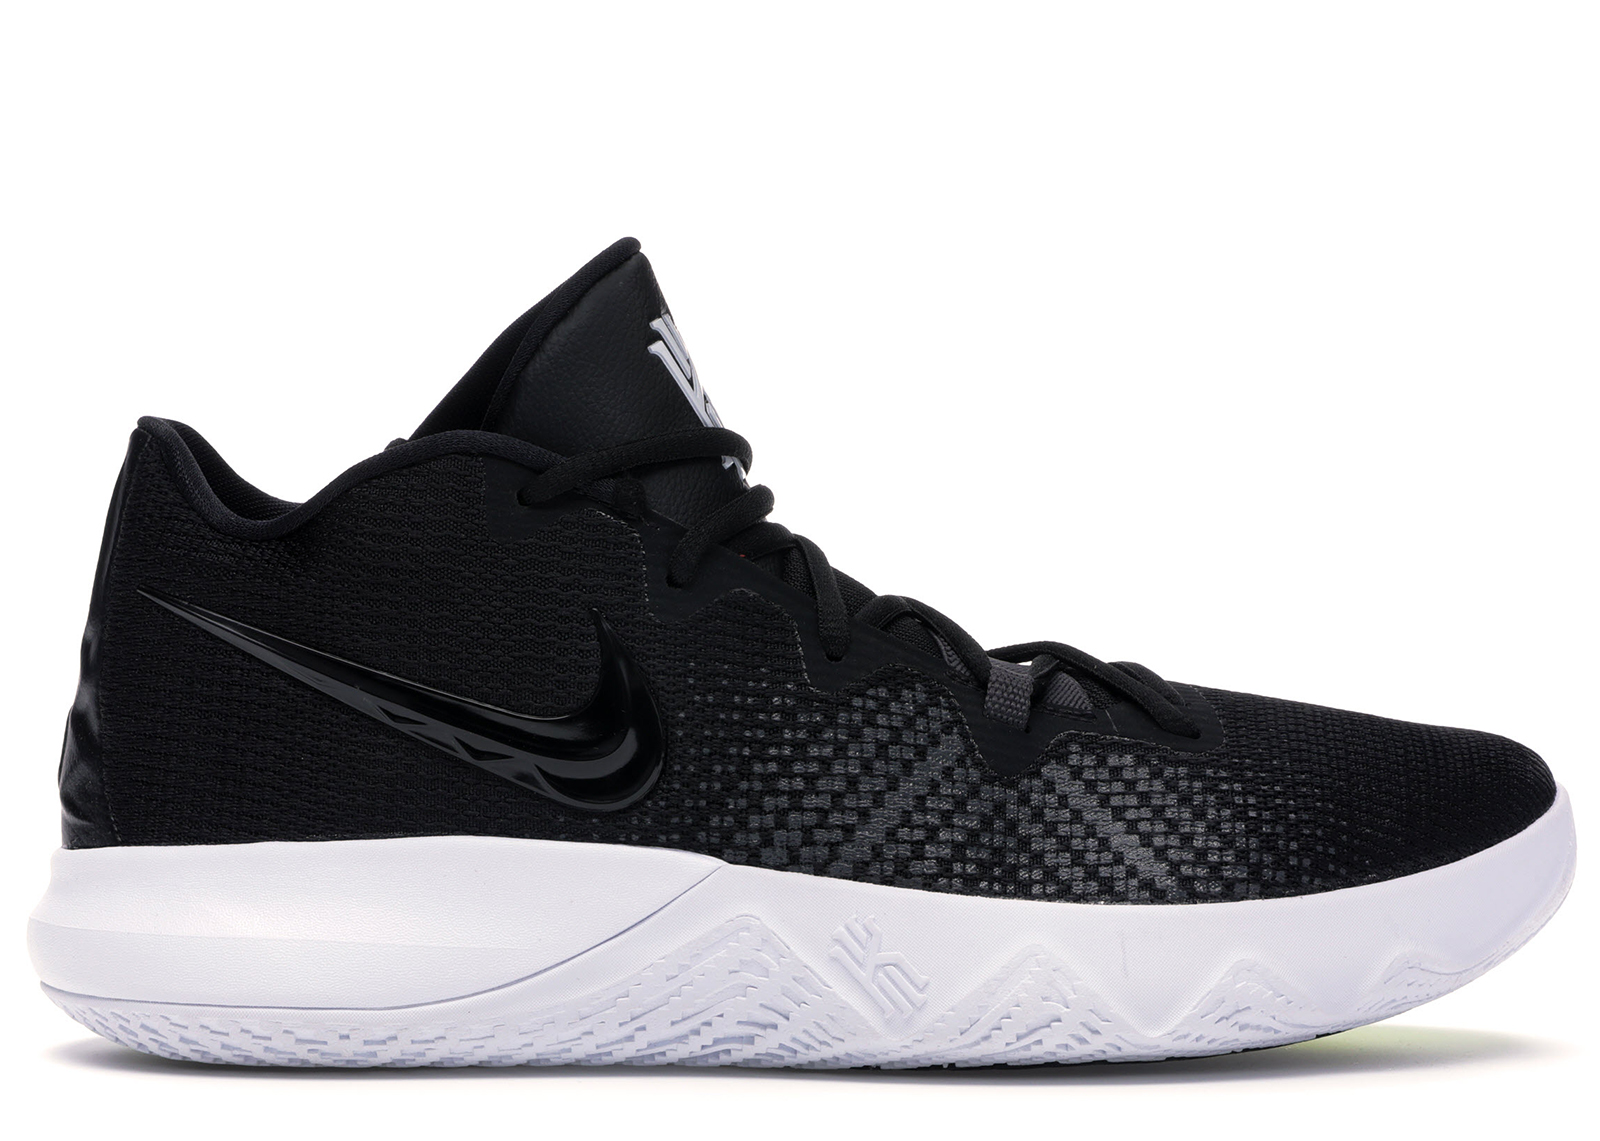 kyrie flytrap mens basketball shoes